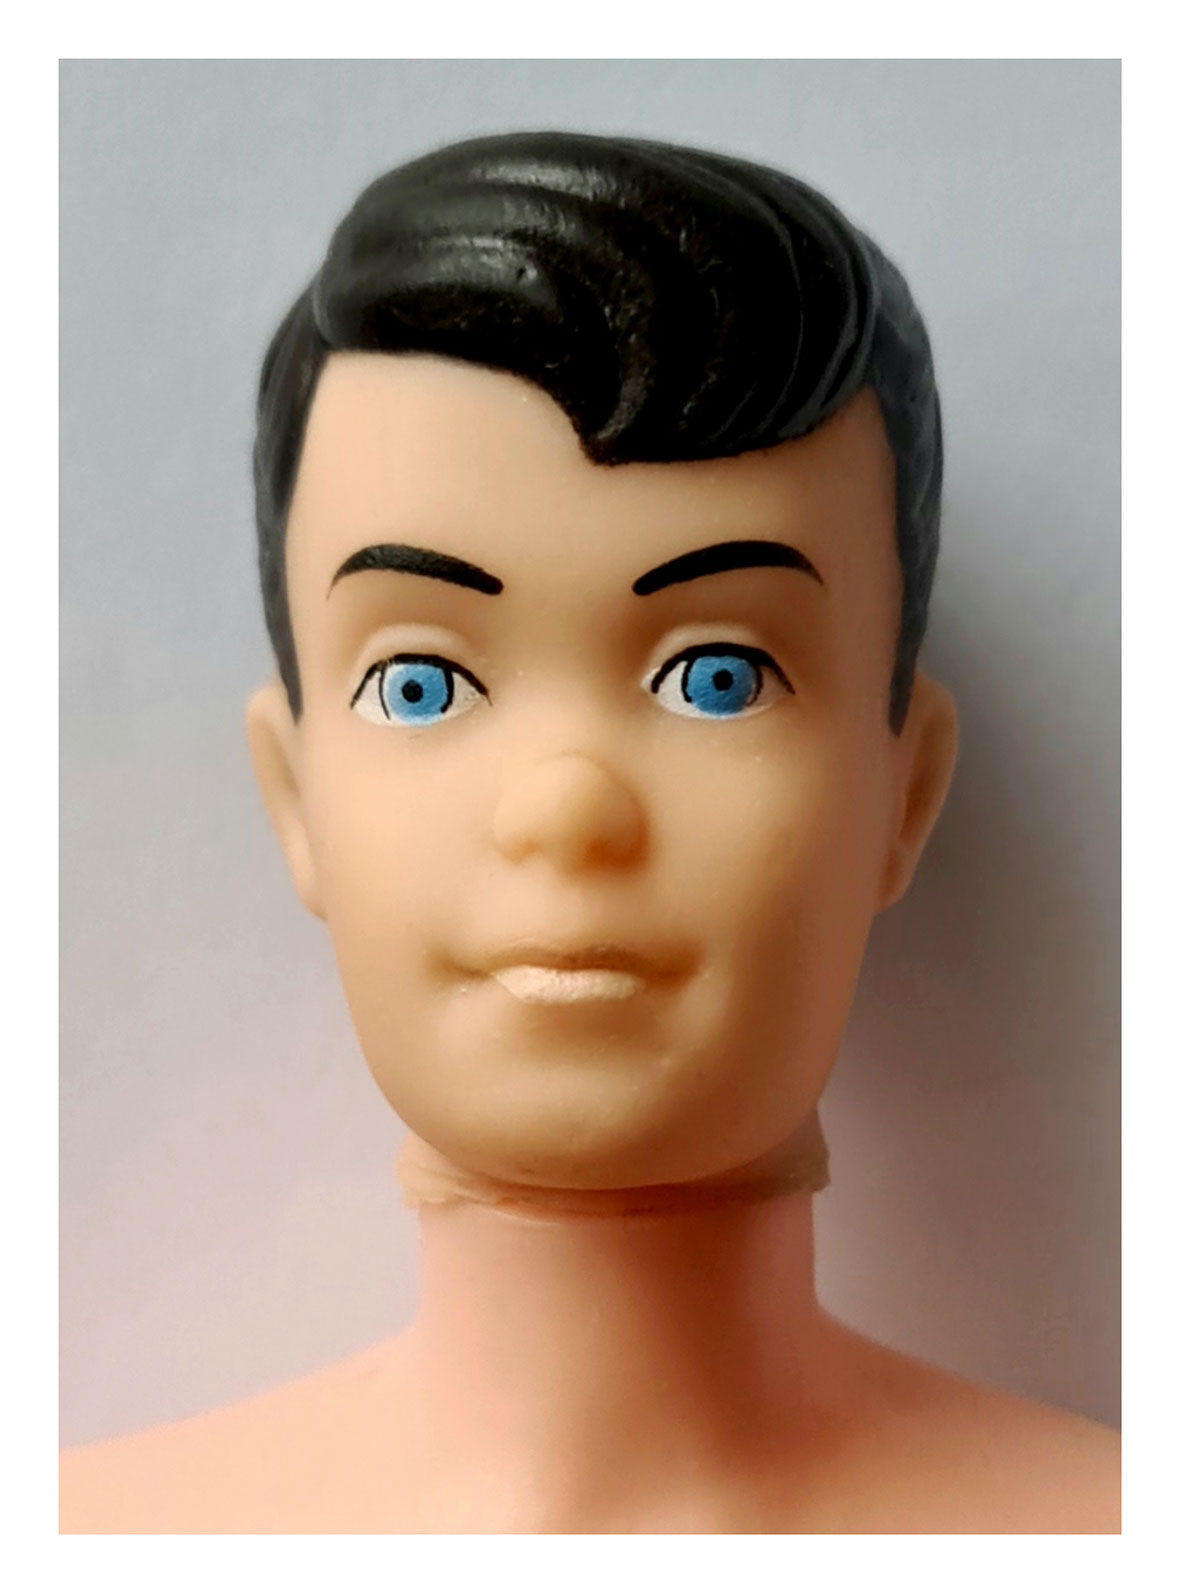 Clone Allan with black hair and blue eyes